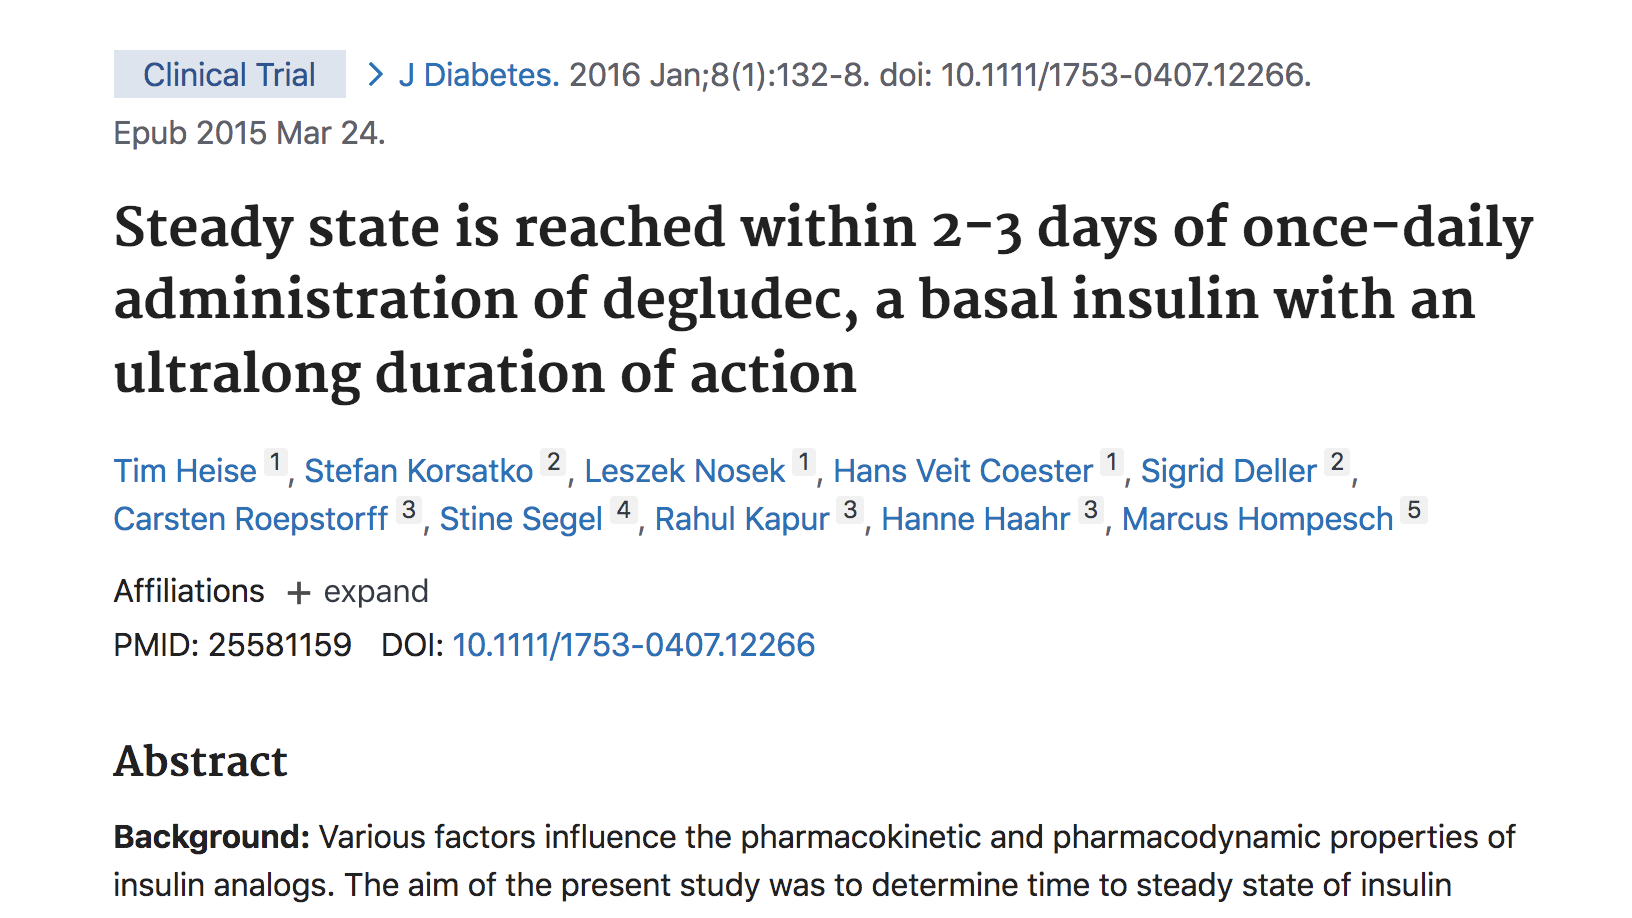 image of Steady state is reached within two to three days of once-daily administration of degludec, a basal insulin with an ultra-long duration of action